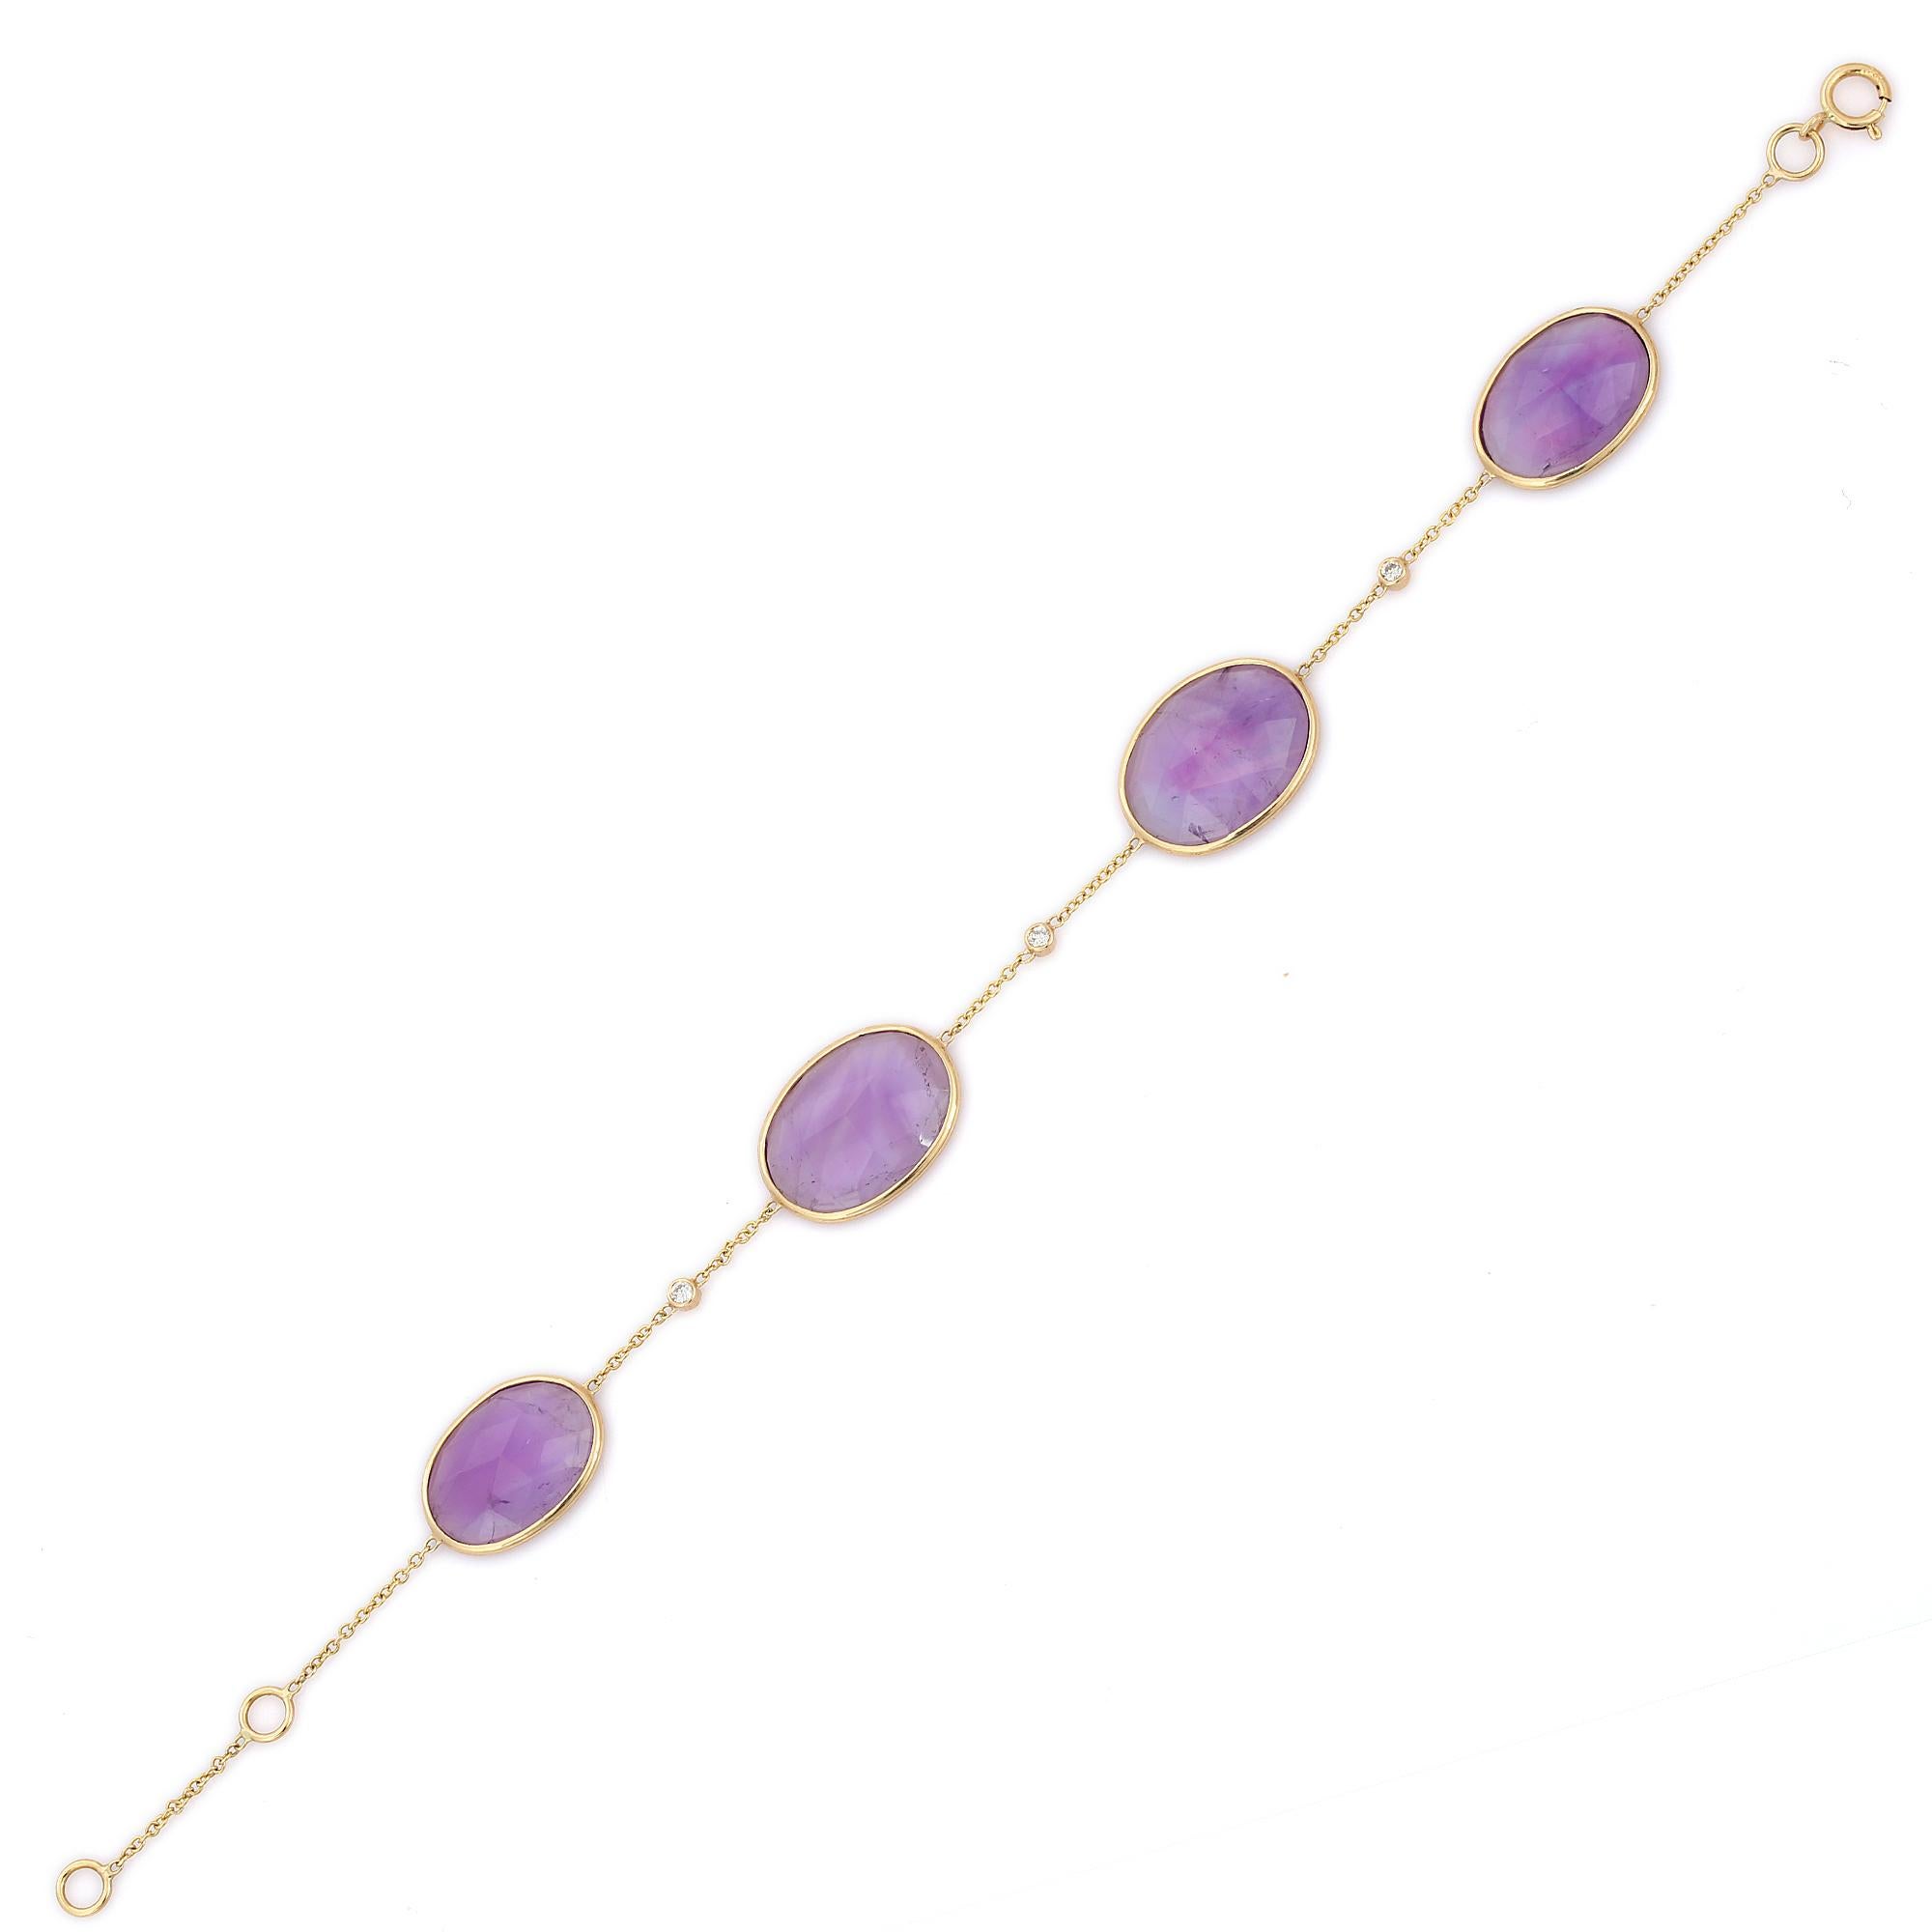 12.92 Ct Oval Cut Amethyst and Diamond Chain Bracelet in 18K Yellow Gold For Sale 2